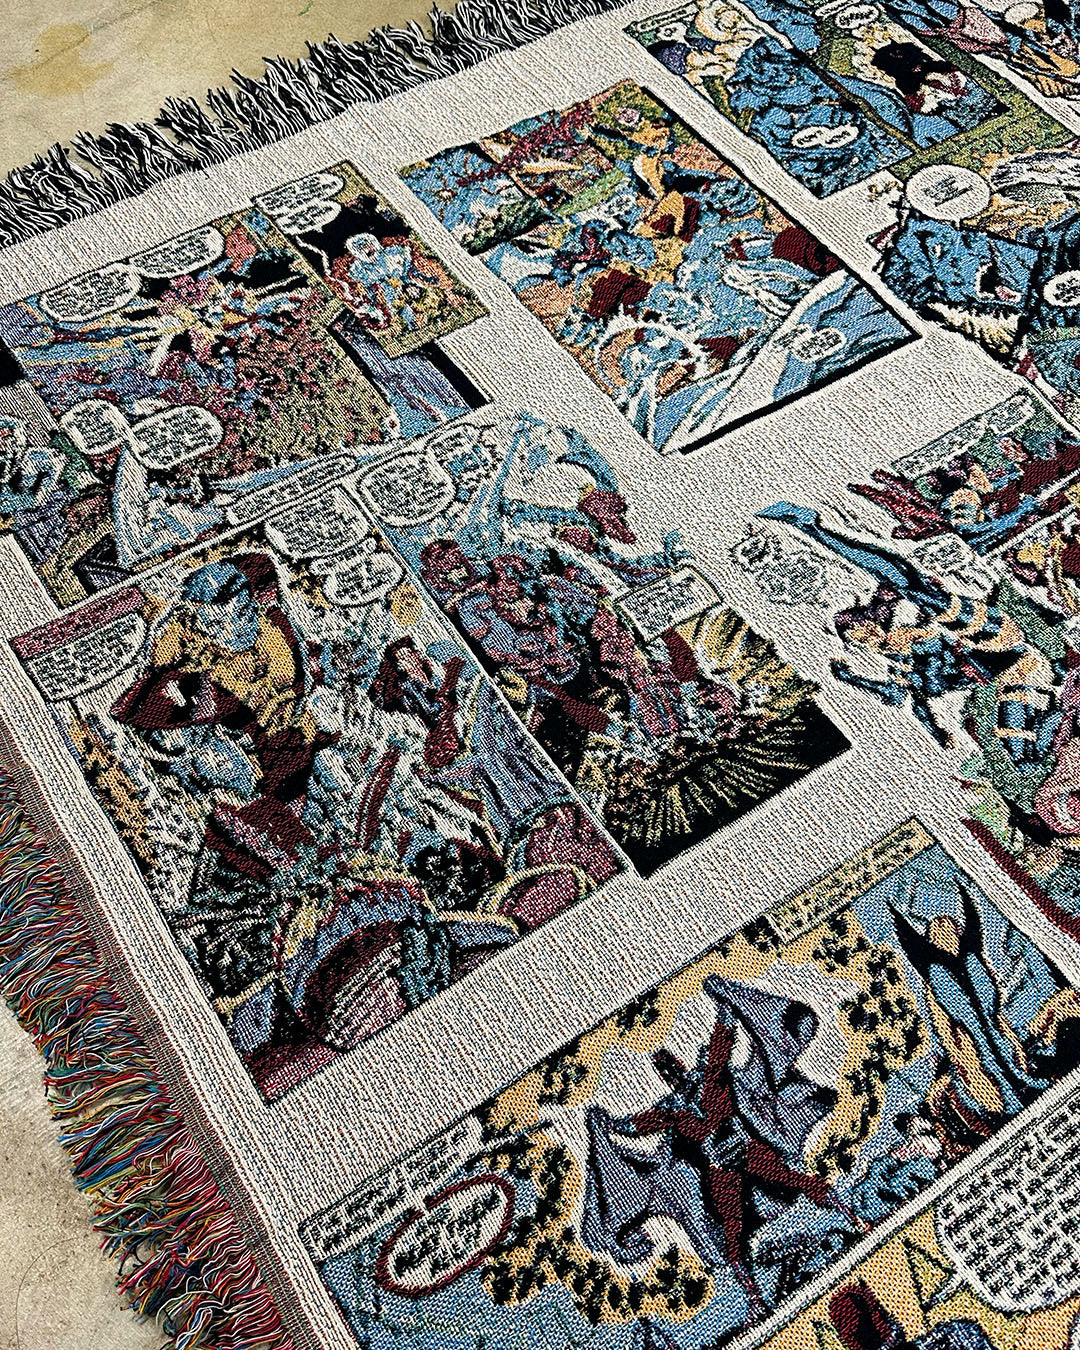 X-MEN COMIC PAGES TAPESTRY BLANKET